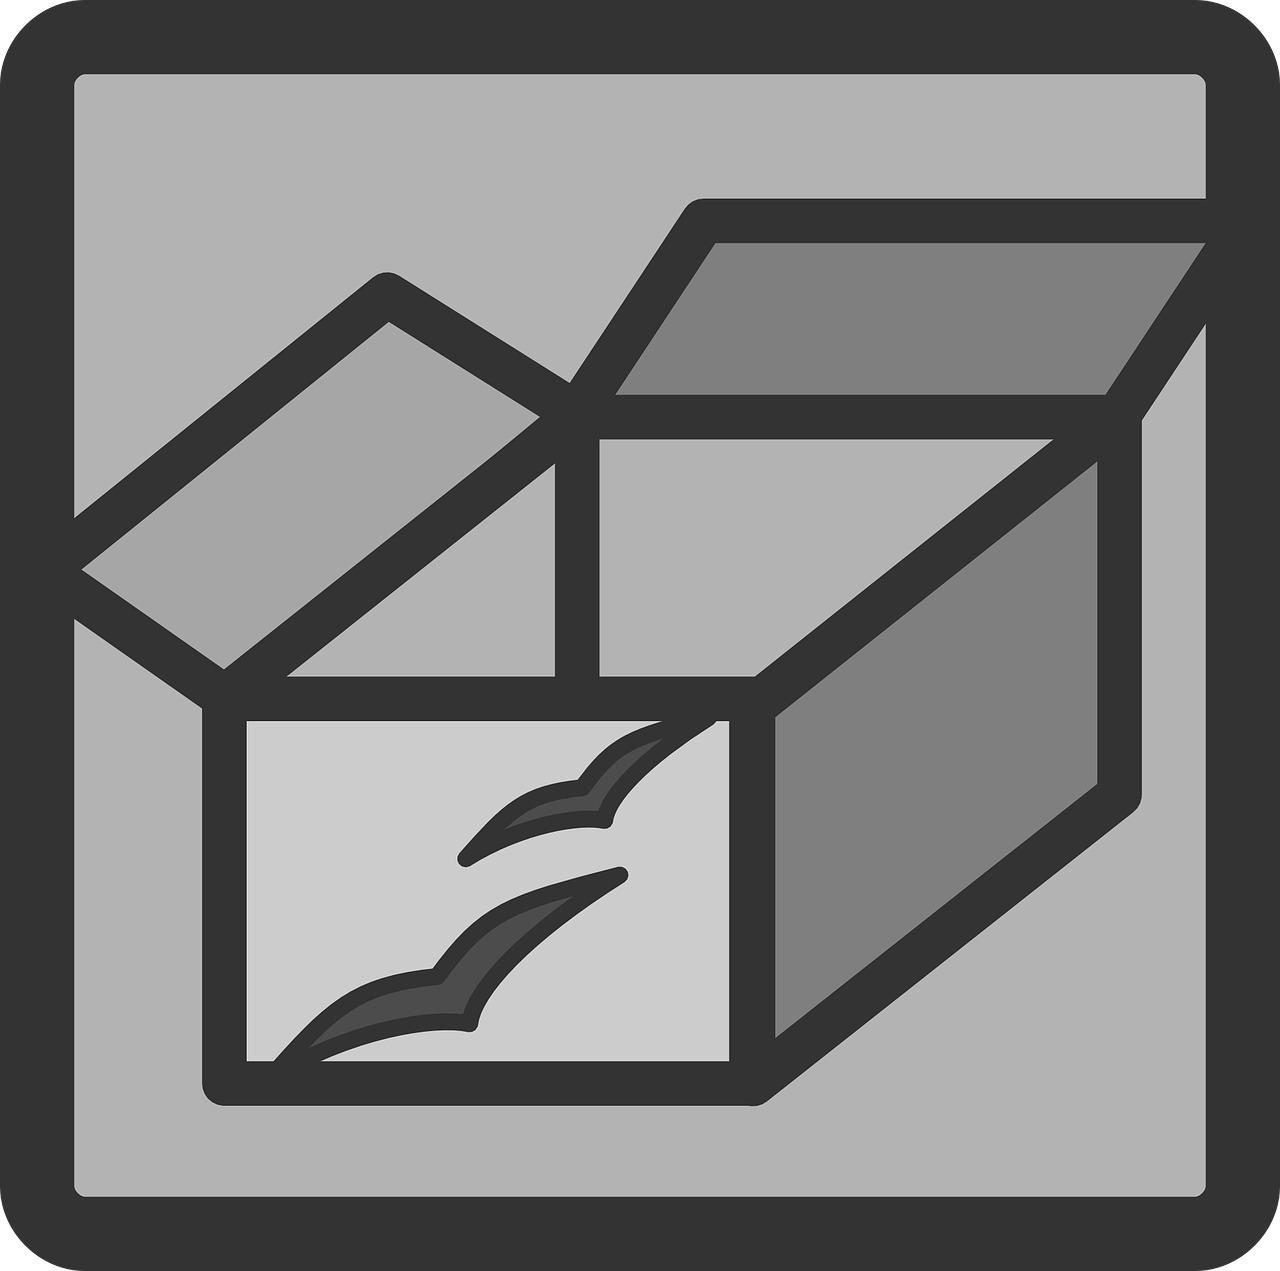 box,open,empty,icon,symbol,free vector graphics,free pictures, free photos, free images, royalty free, free illustrations, public domain